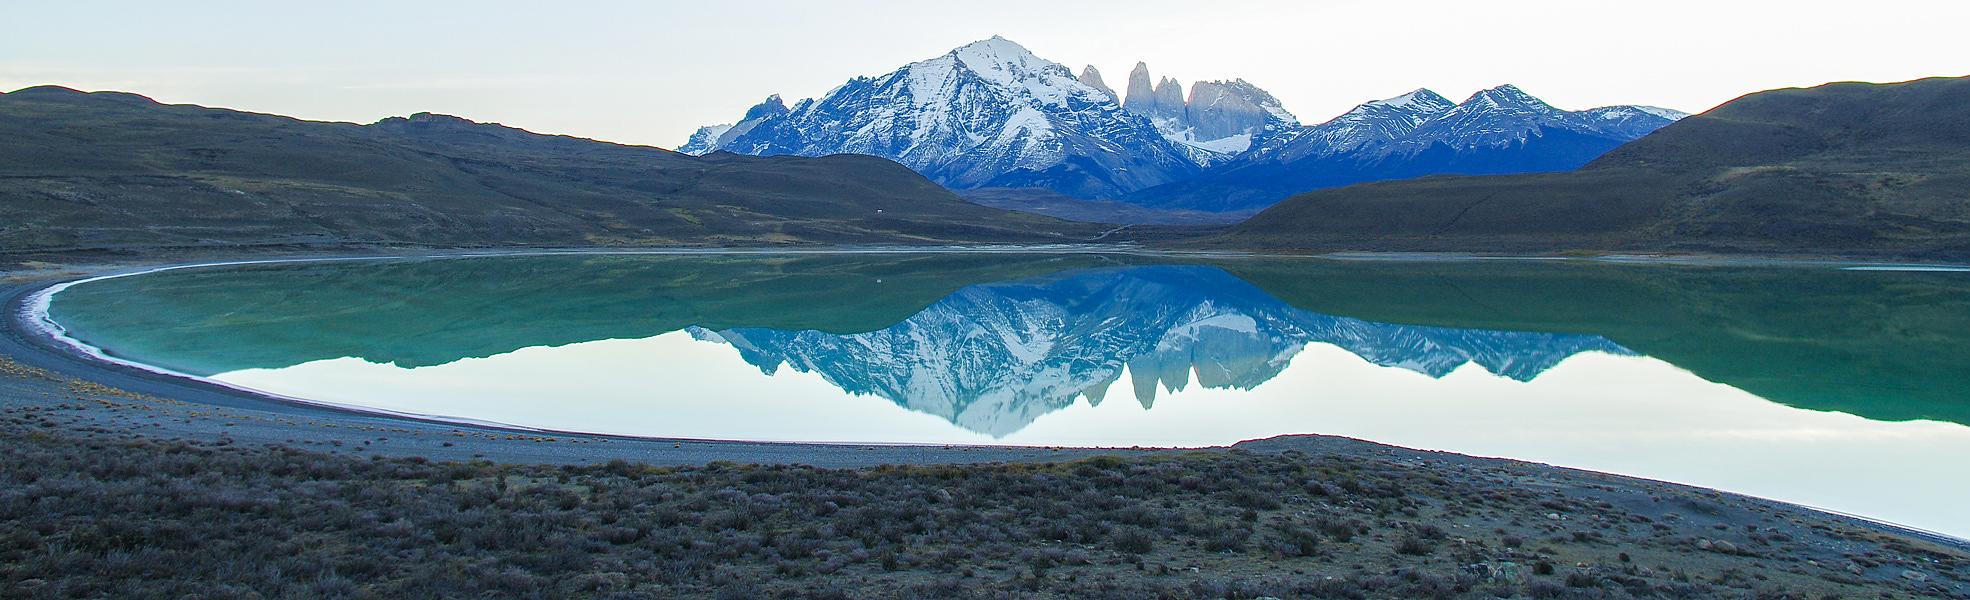 Northern Patagonia of Argentina & Chile